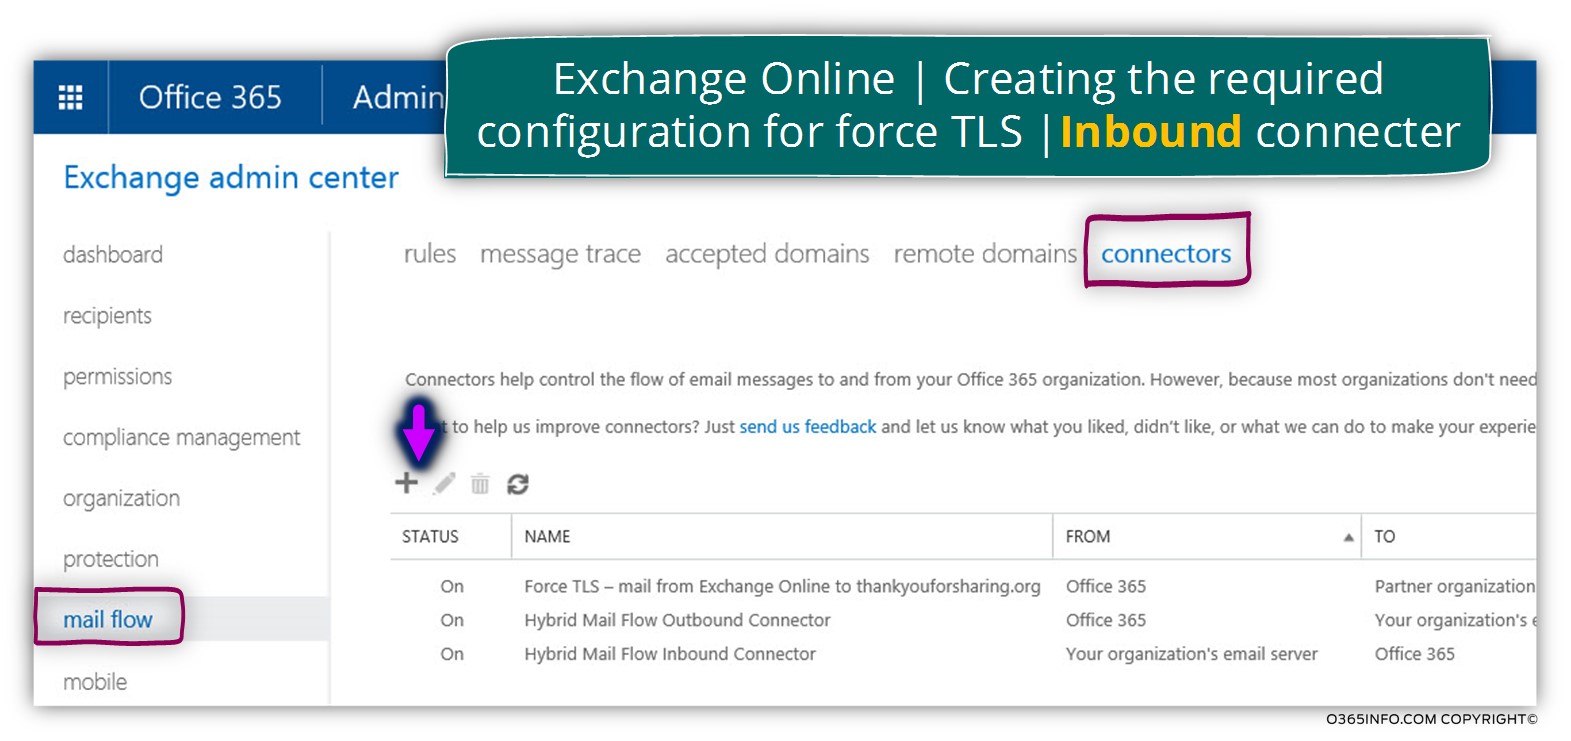 Exchange Online - Create new inbound connector and set the required configuration setting for force TLS - 01